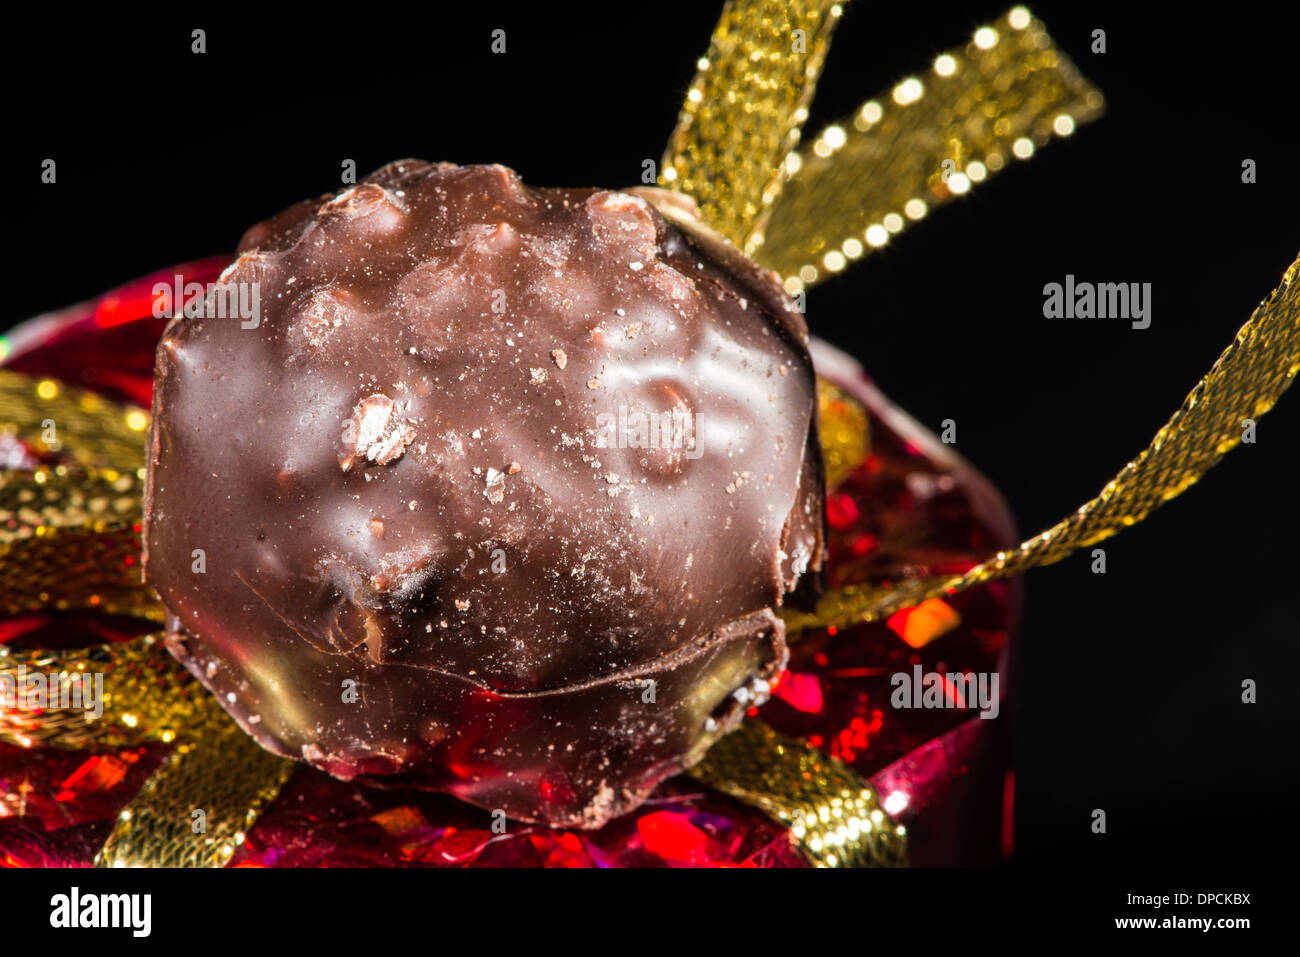 Chocolate bonbon and gold color shiny package Stock Photo